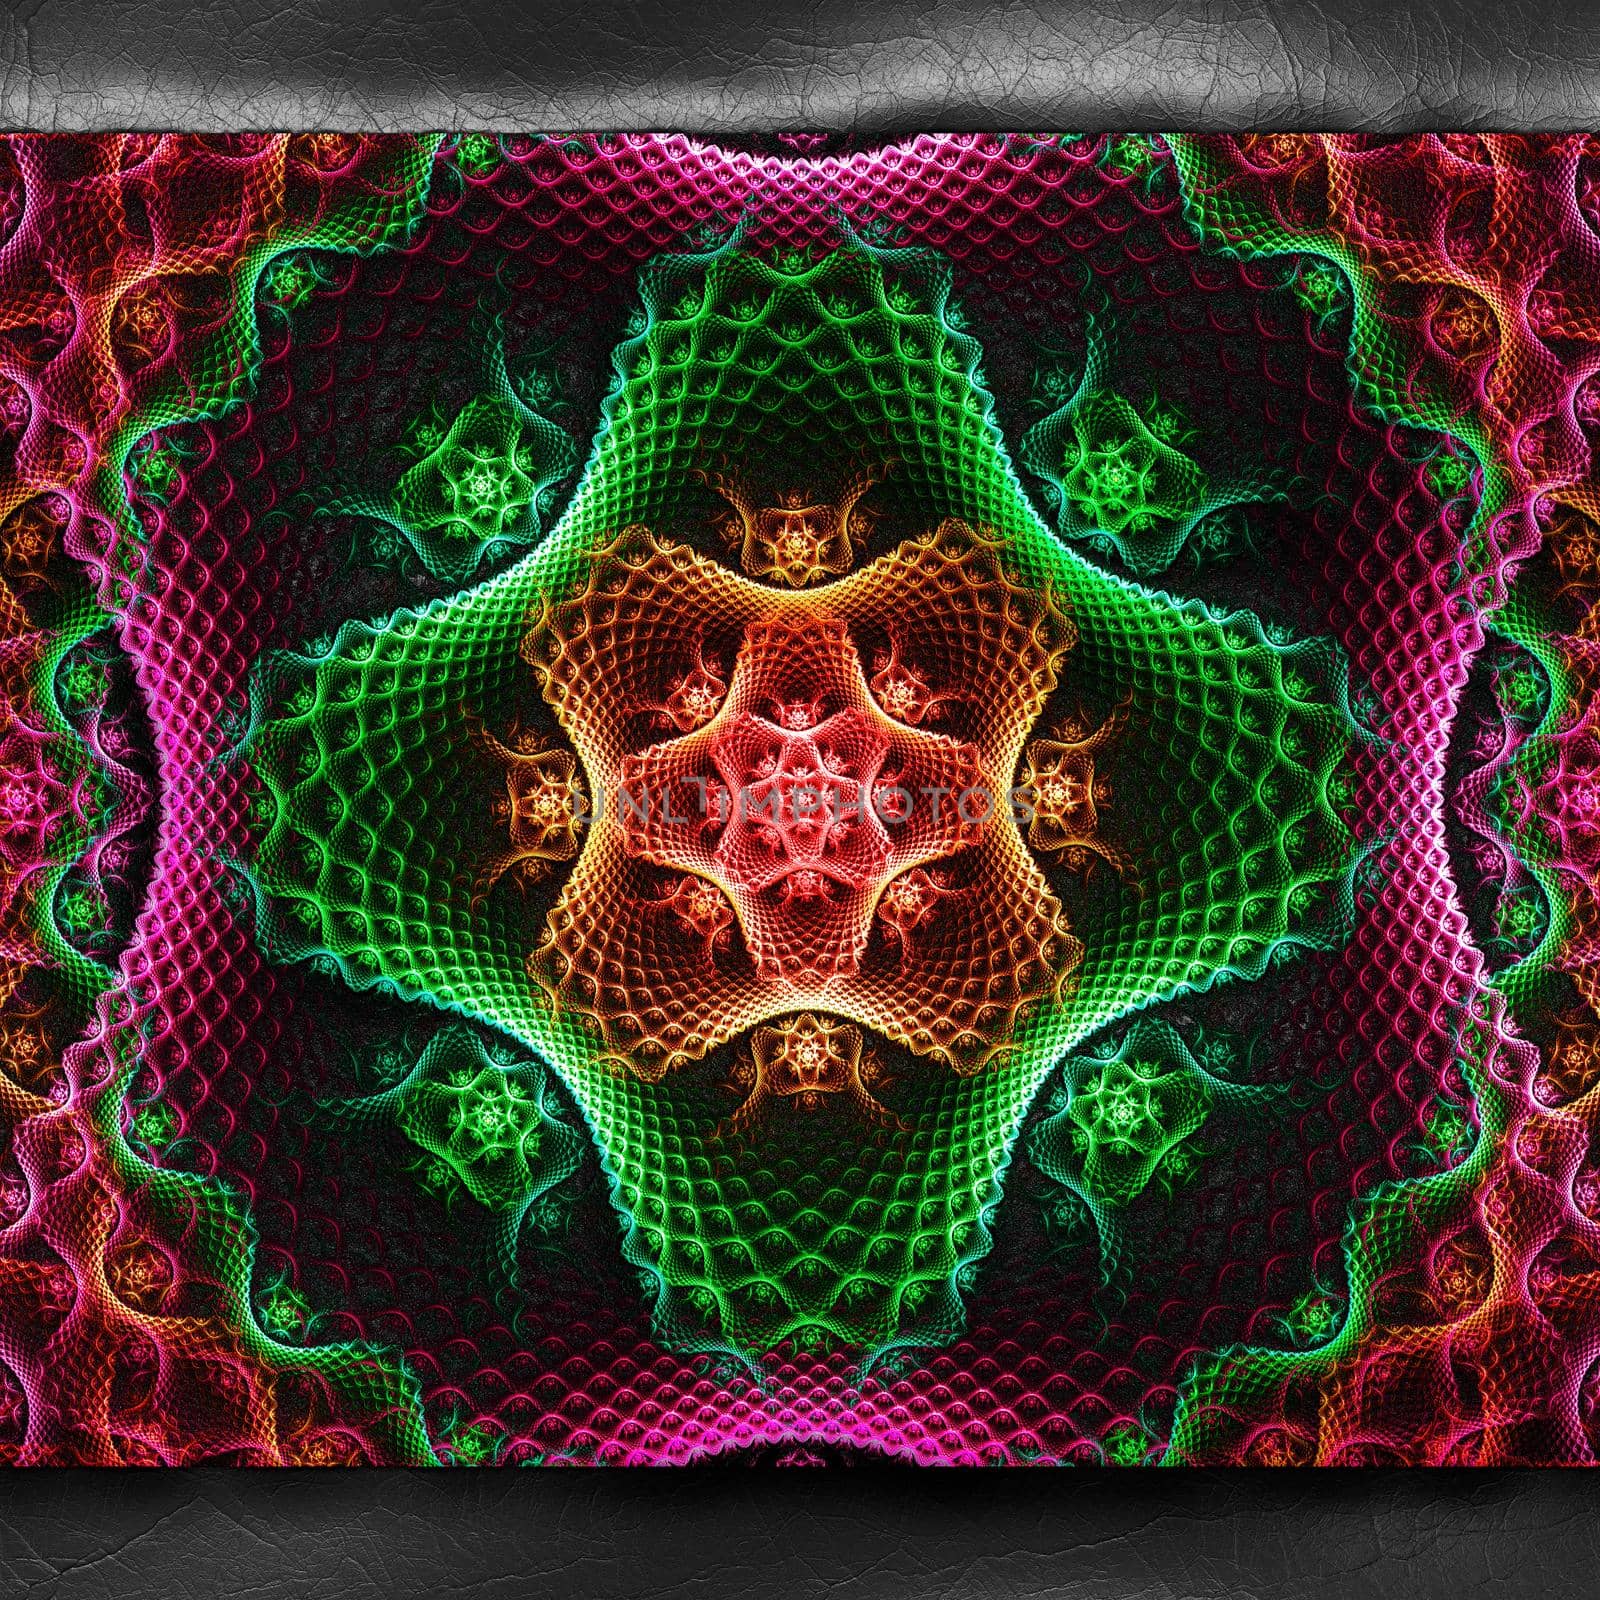 3D rendering of plastic fractal on leather by stocklady